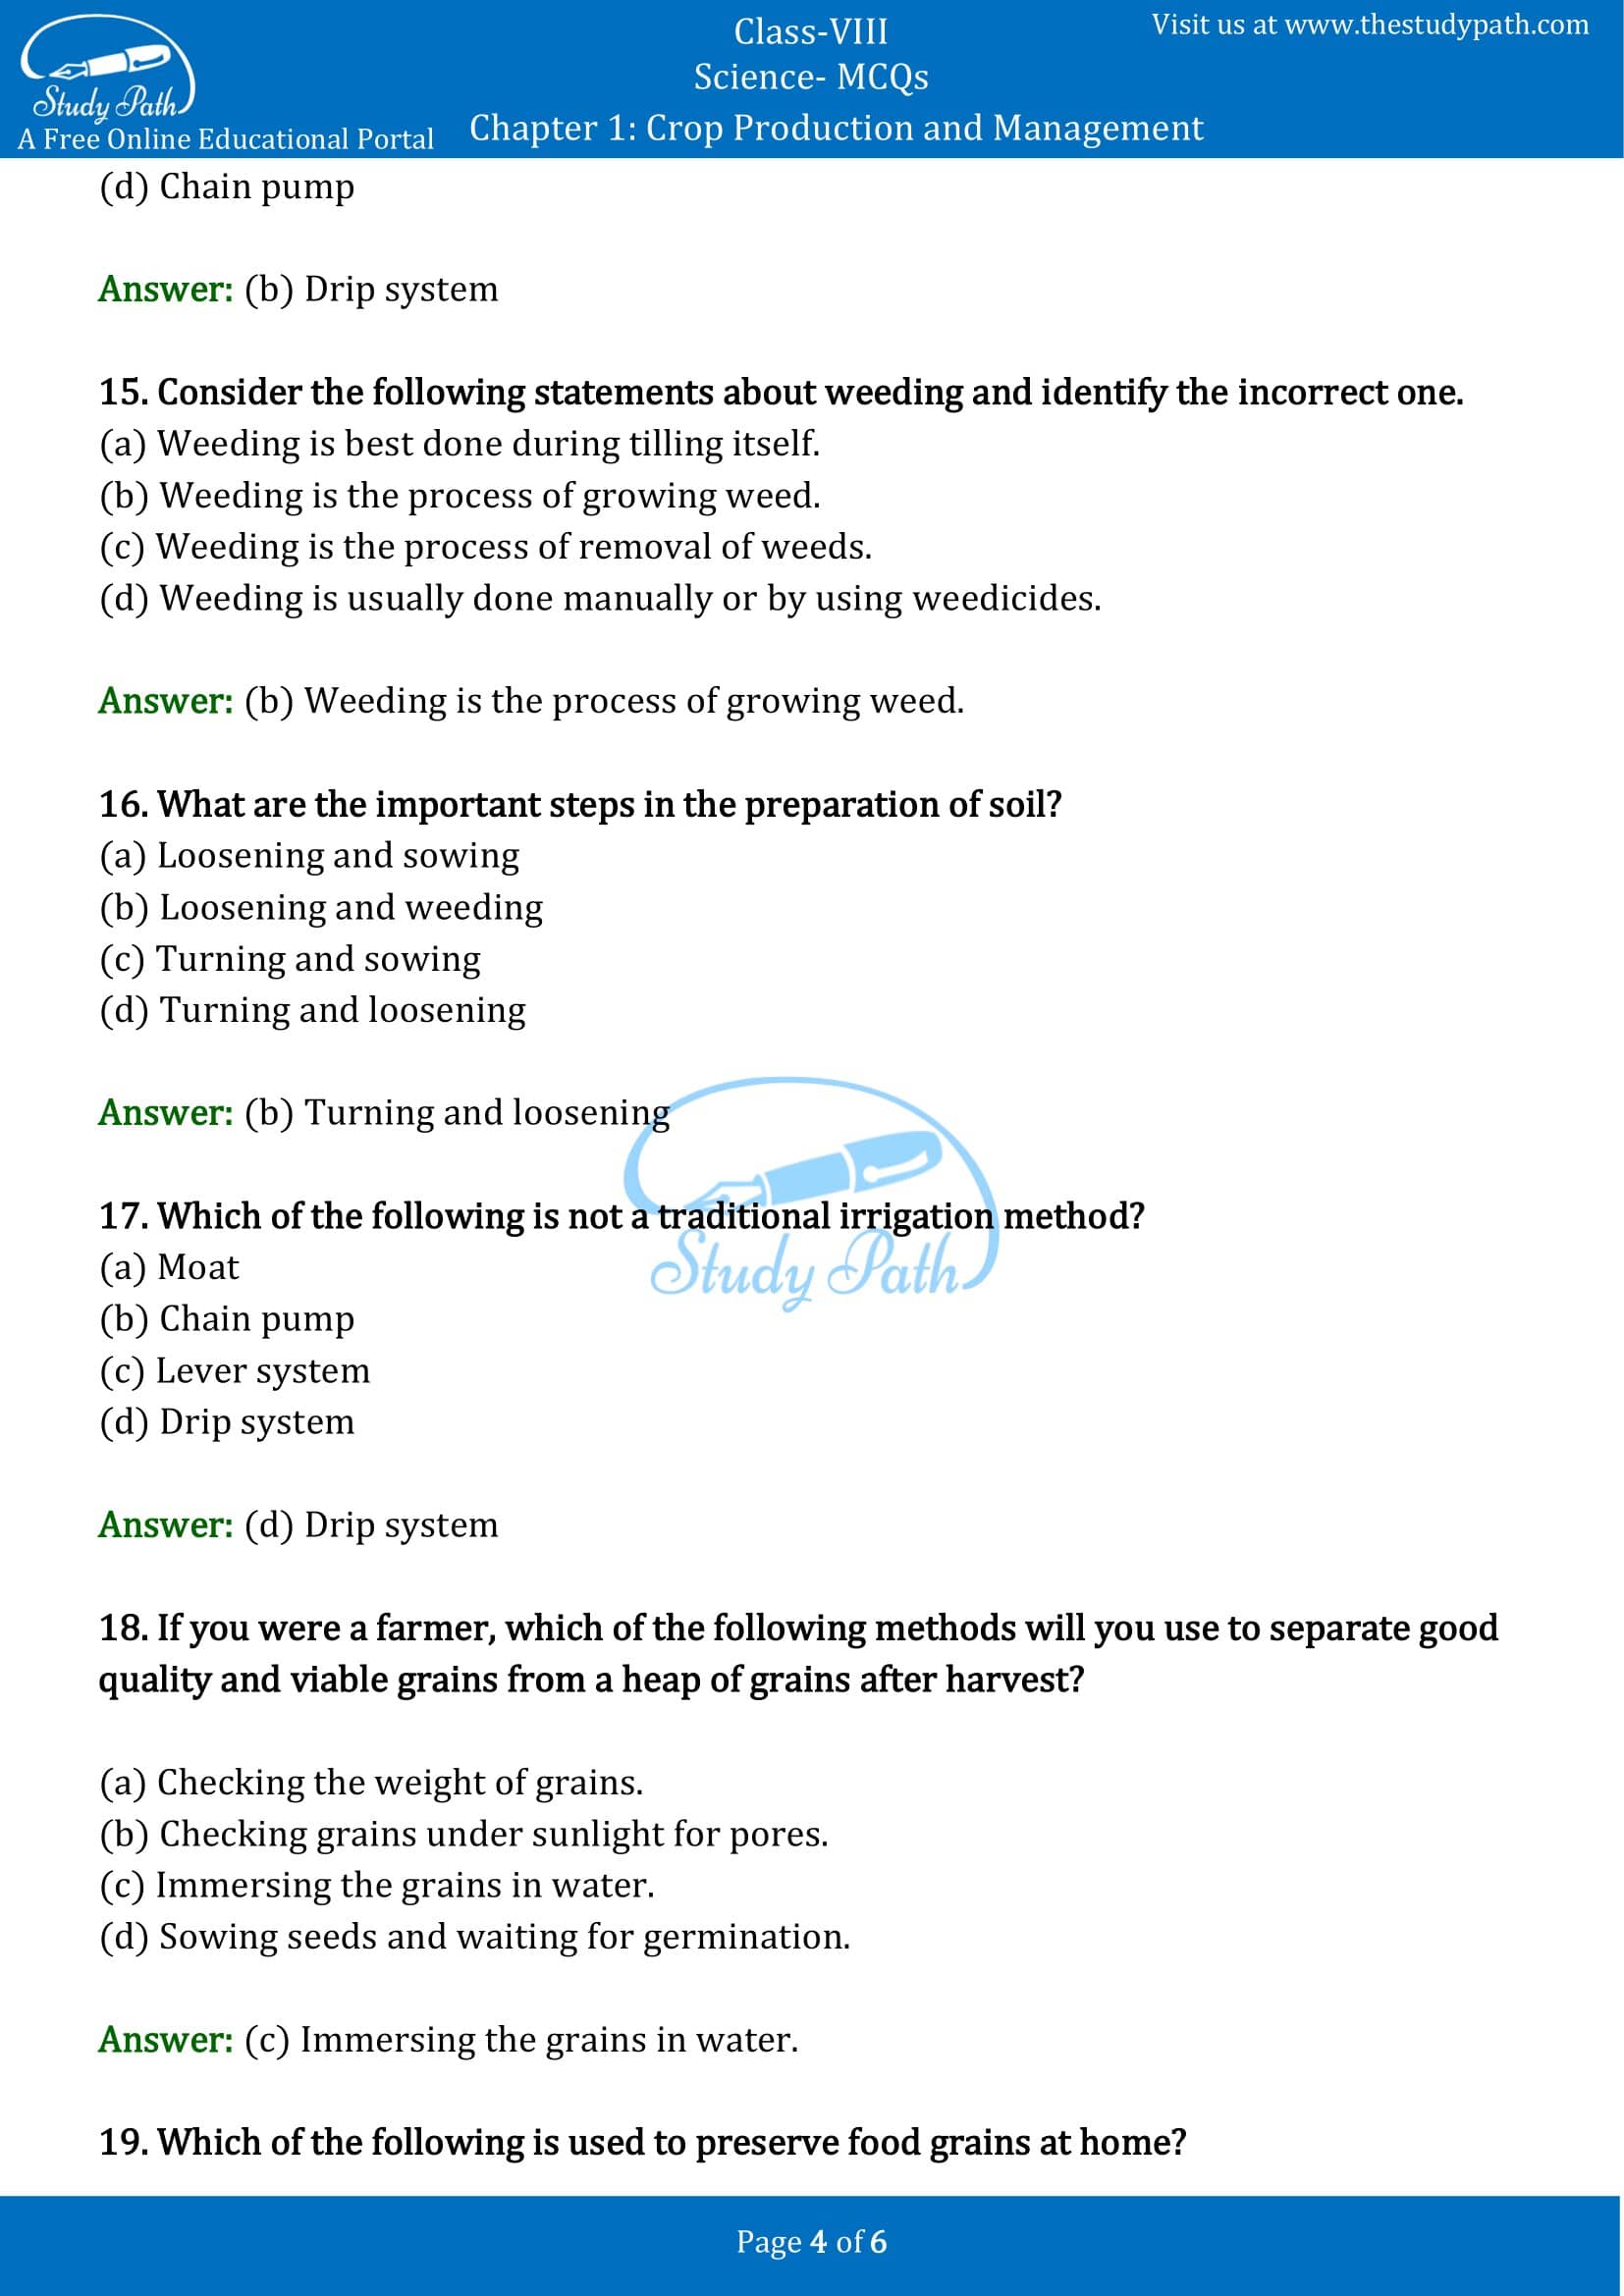 MCQ Questions for Class 8 Science Chapter 1 Crop Production and Management with Answers PDF -4